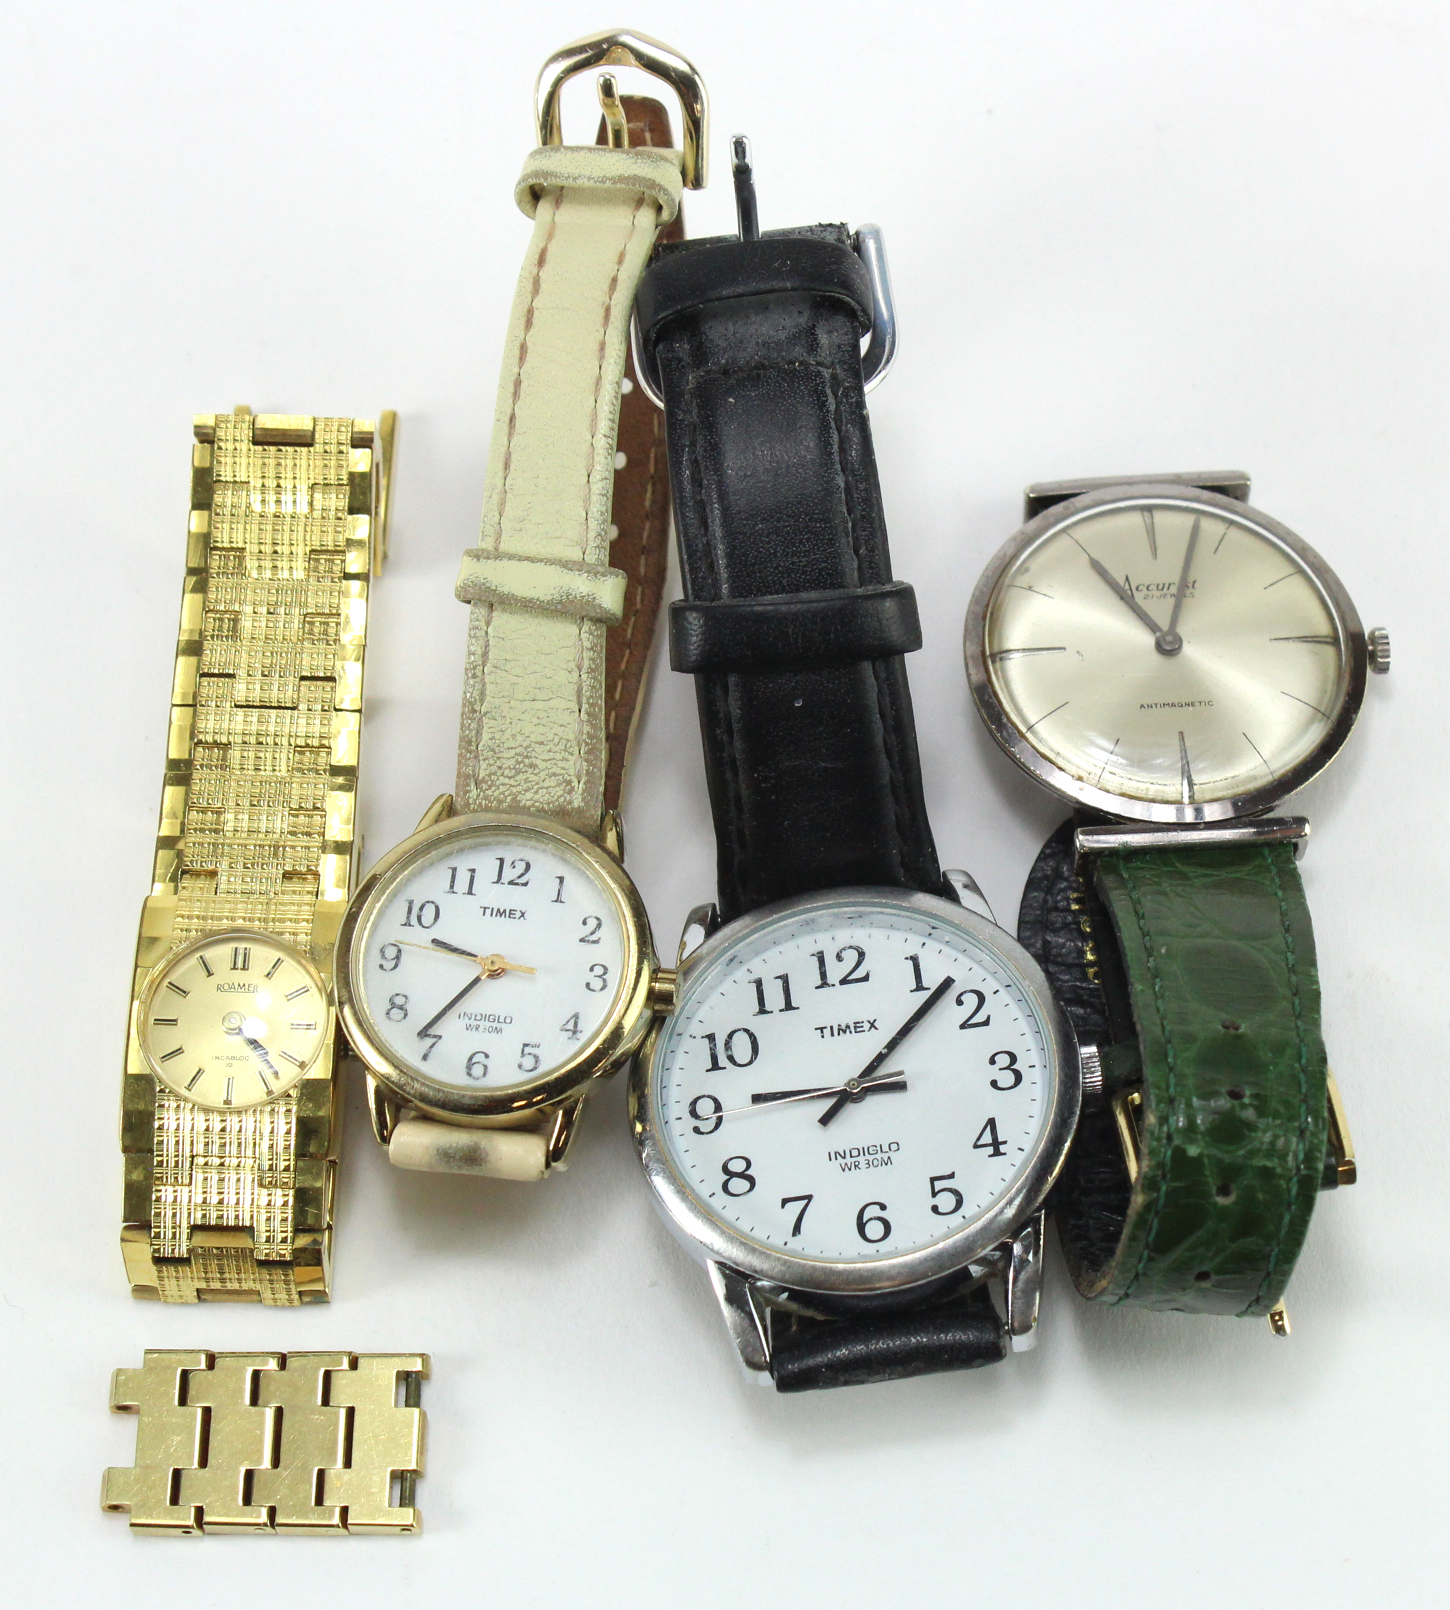 Gents manual wind Accurist wristwatch circa 1964 along with two Timex & one ladies Roamer watch.